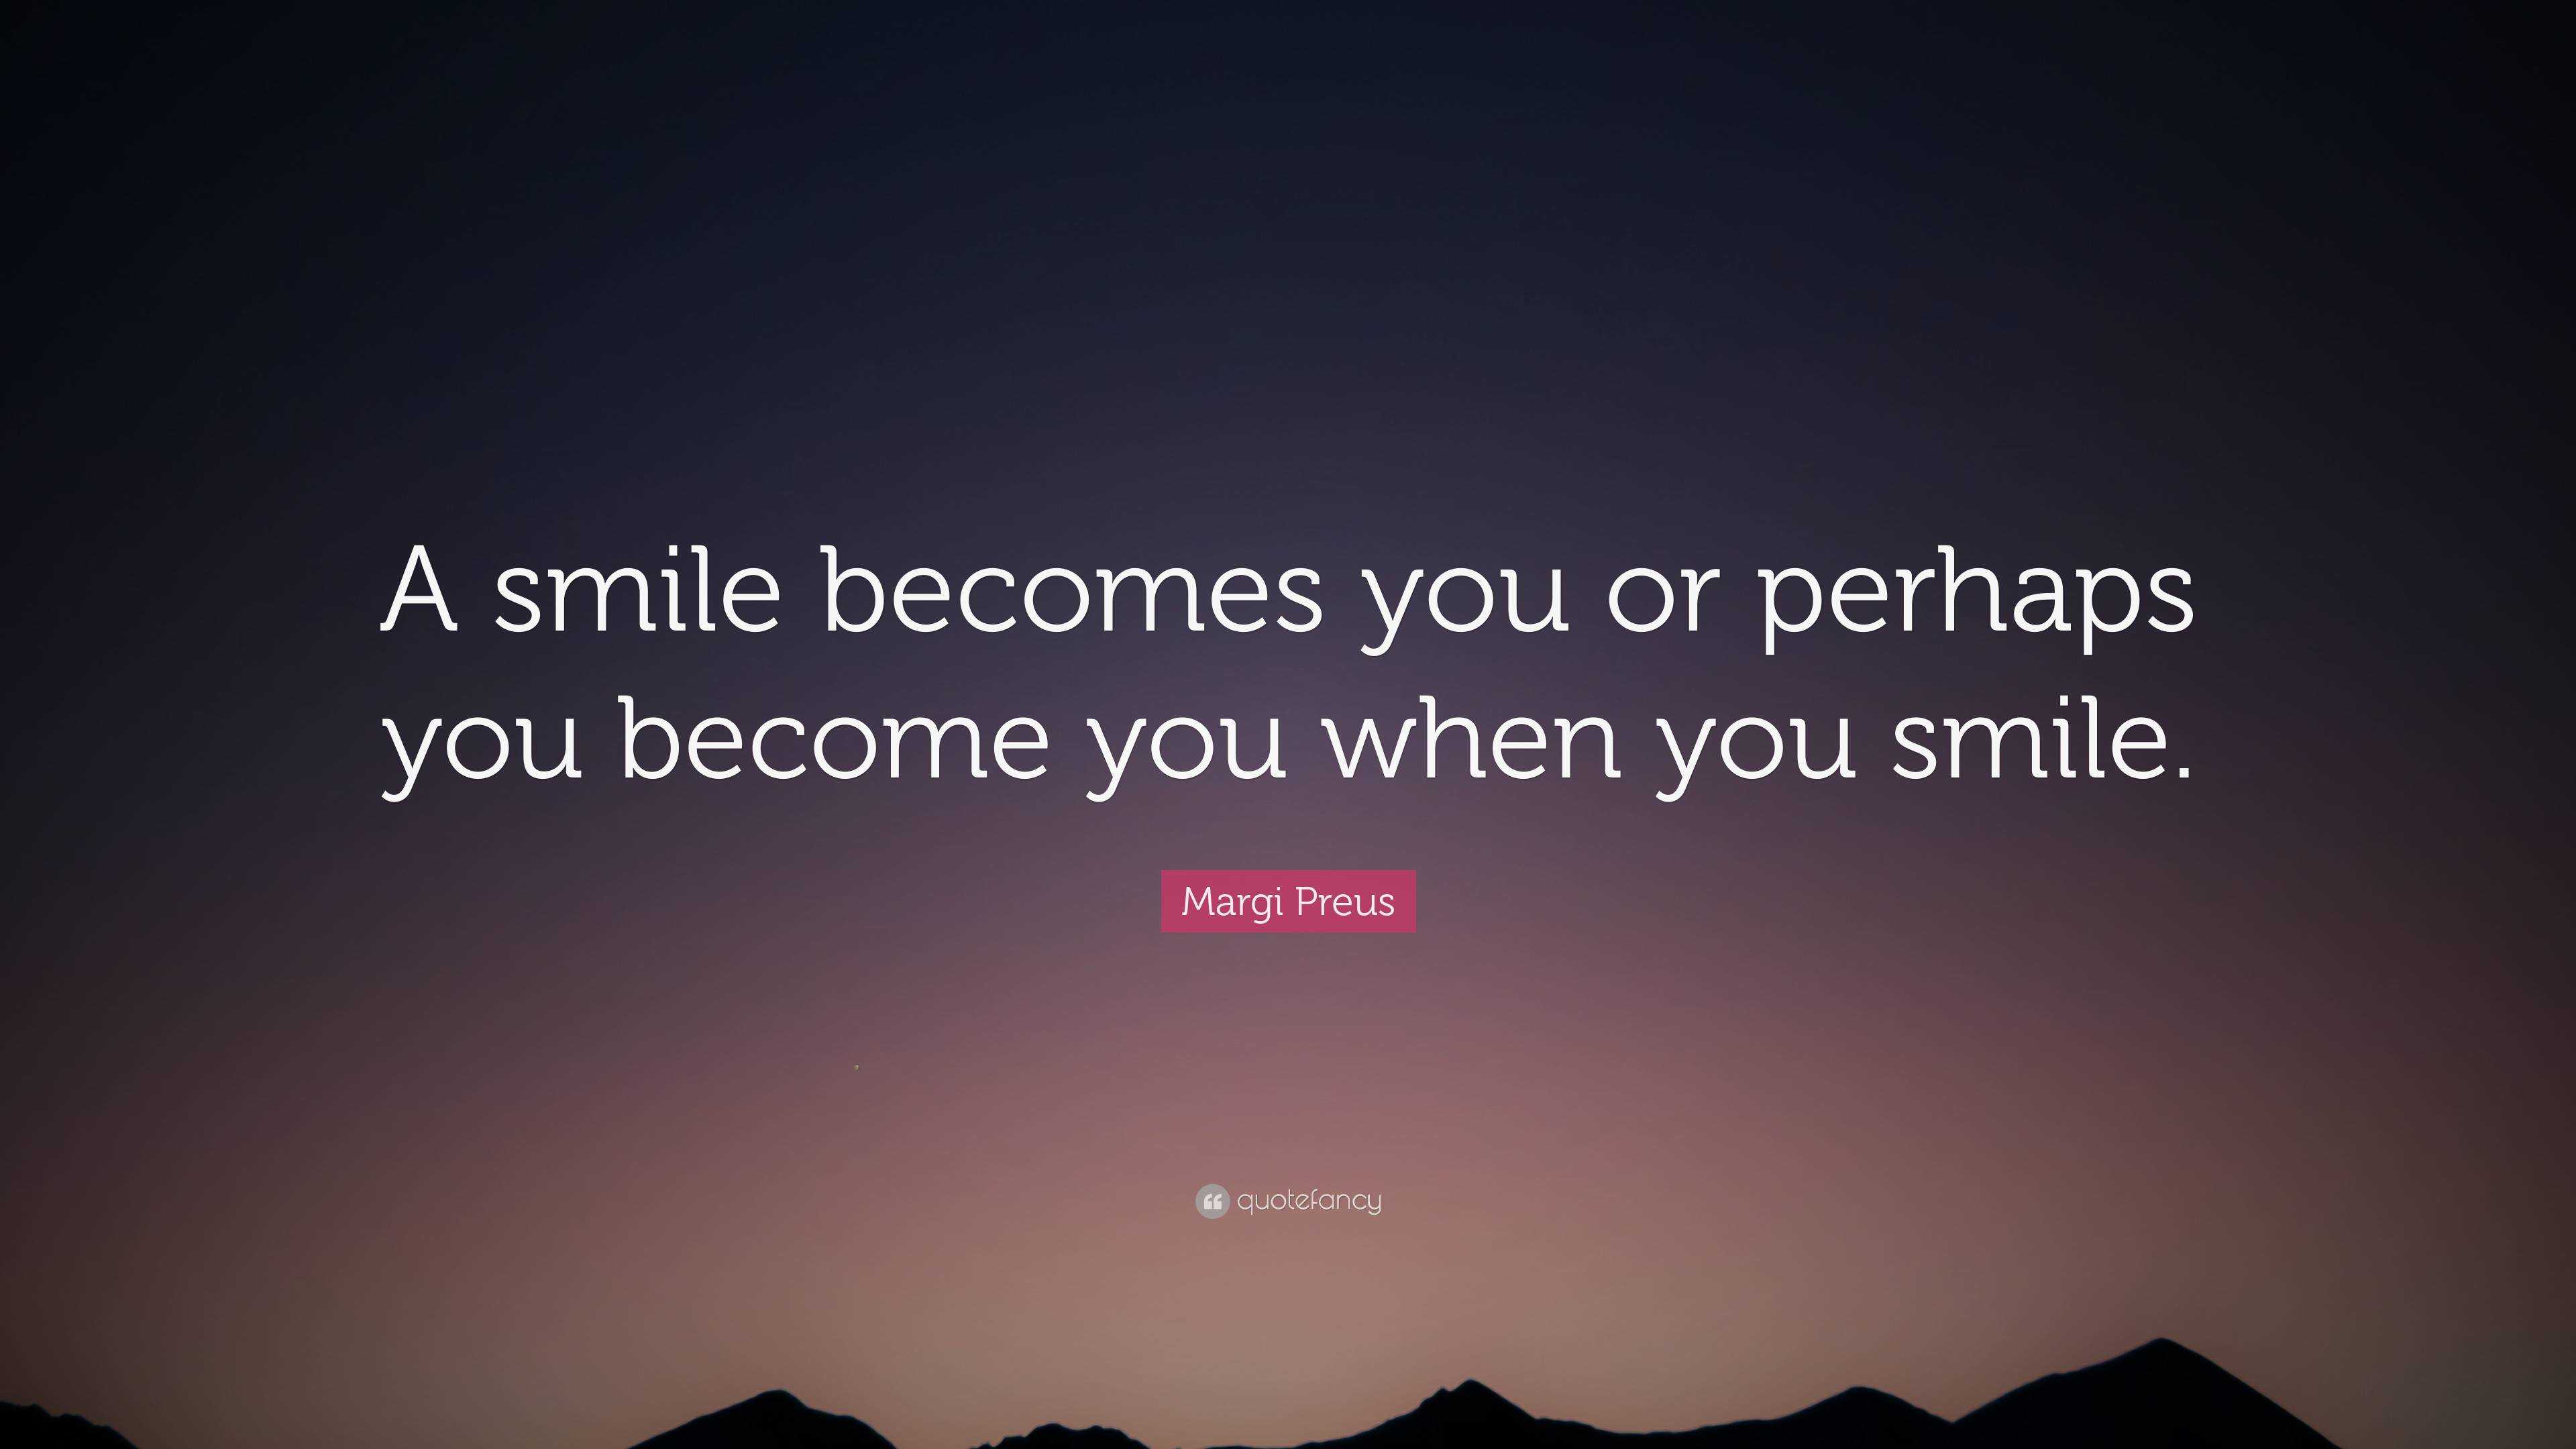 Margi Preus Quote: “A smile becomes you or perhaps you become you when ...